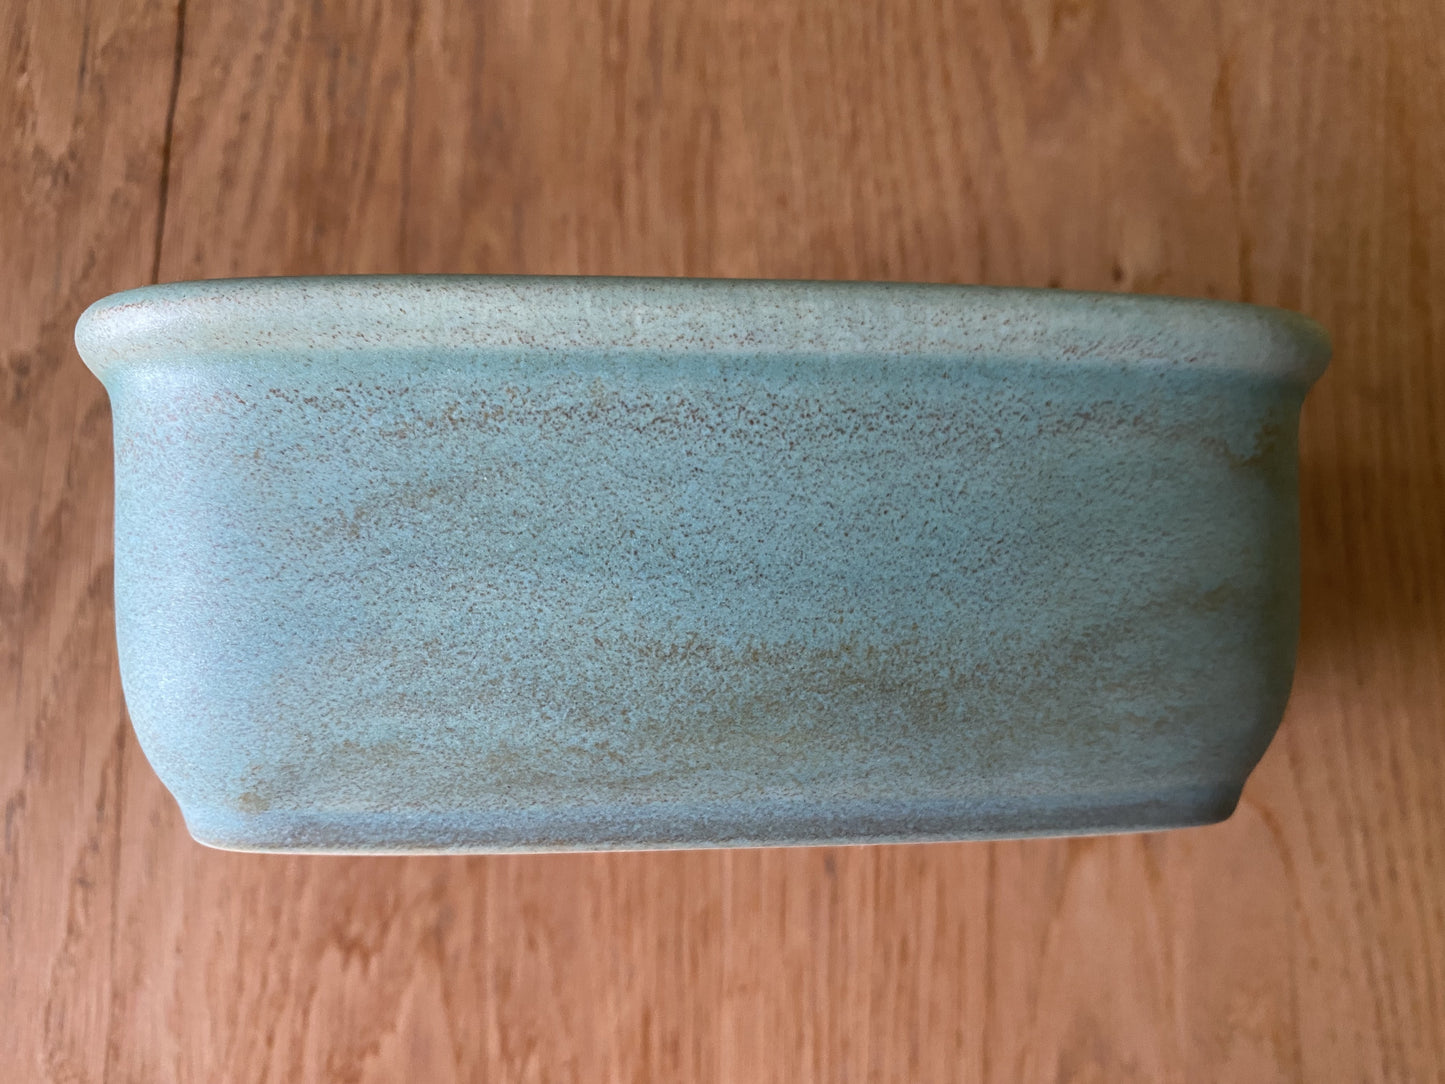 Butter Dish with Lid - Cornish Copper Glaze